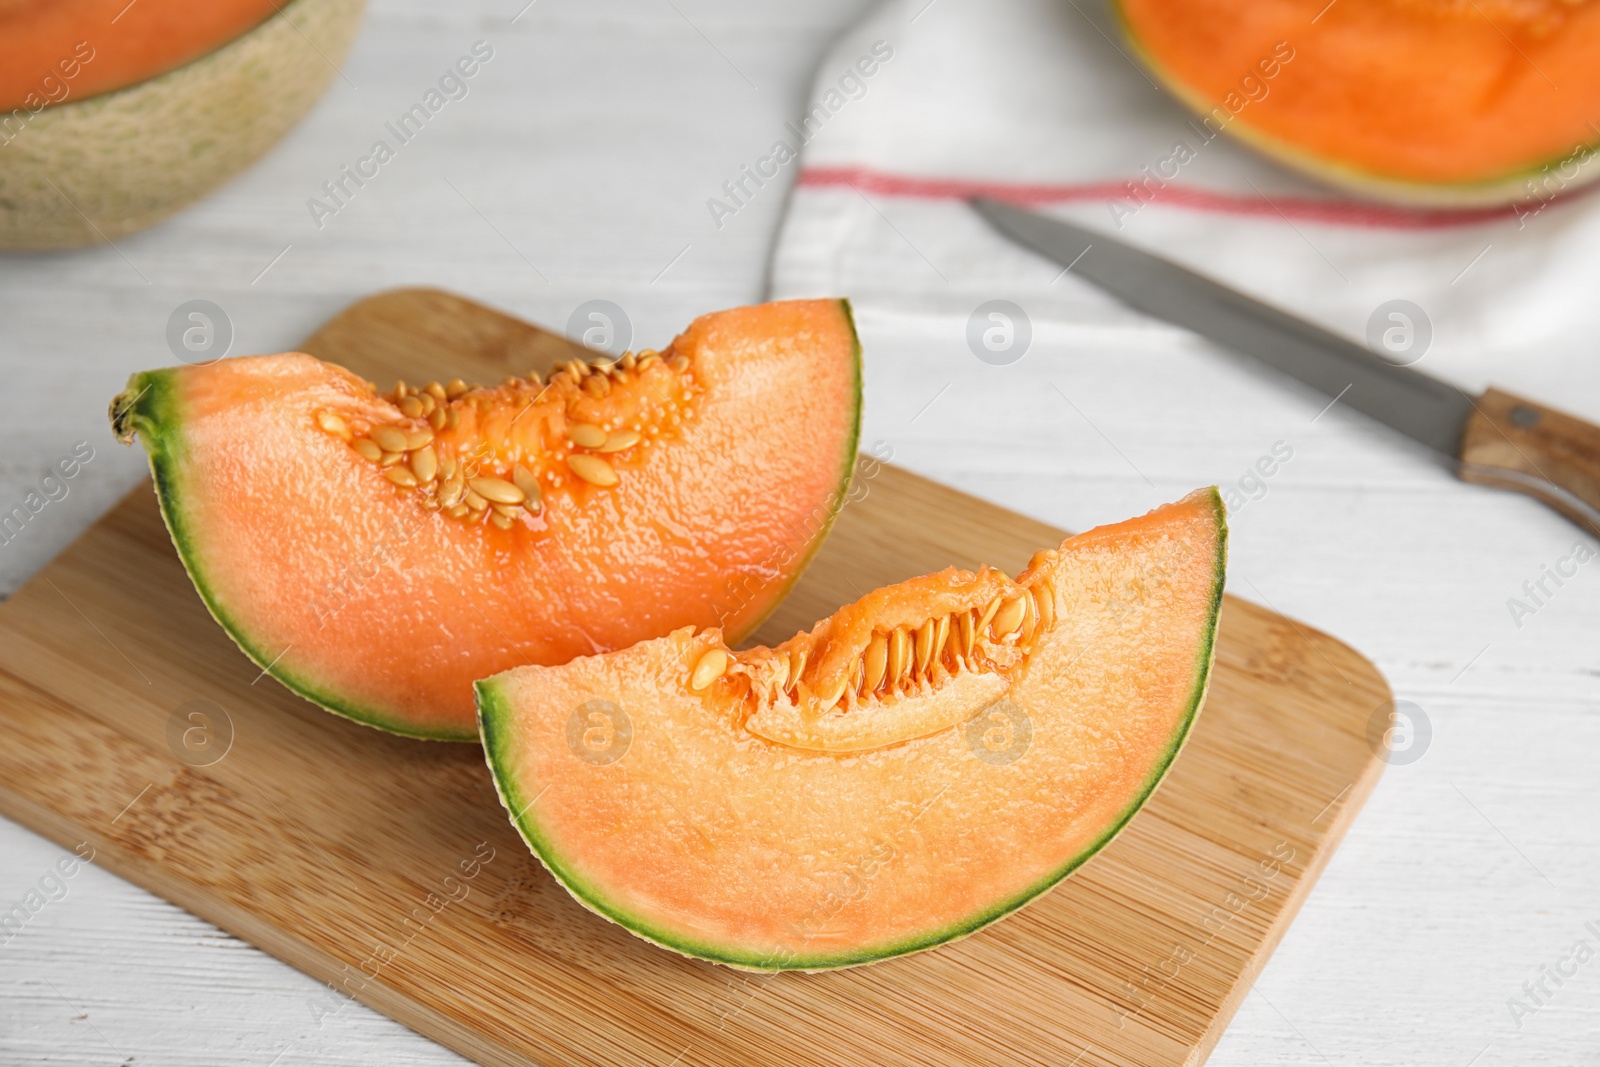 Photo of Slices of ripe cantaloupe melon on white wooden table